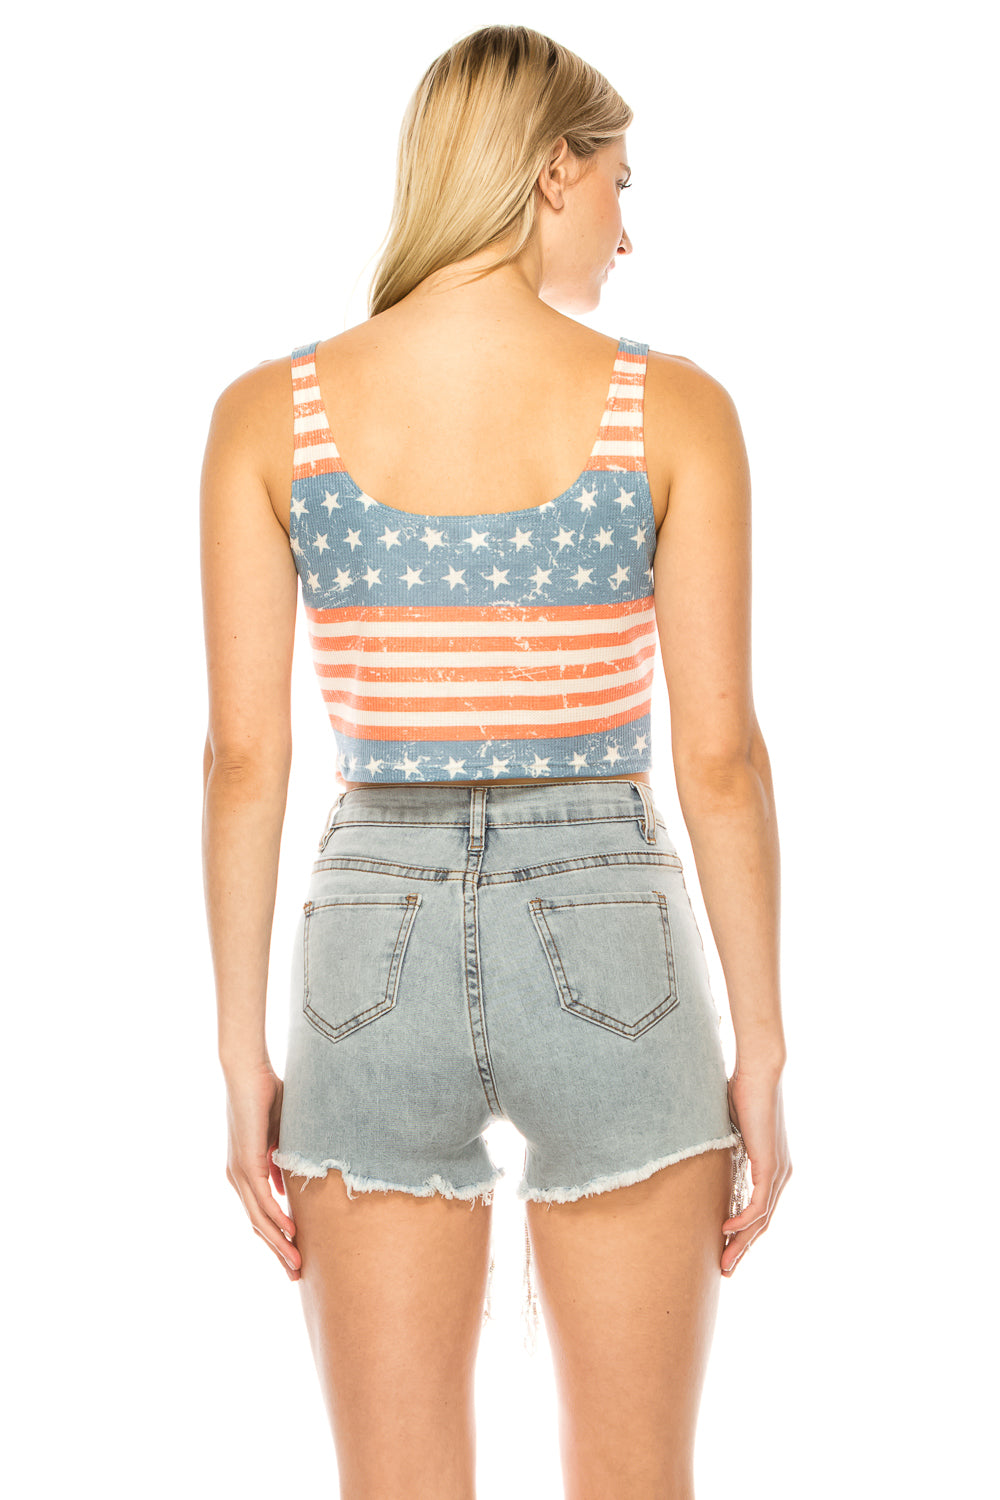 STARS AND STRIPES CROP TOP - Trailsclothing.com